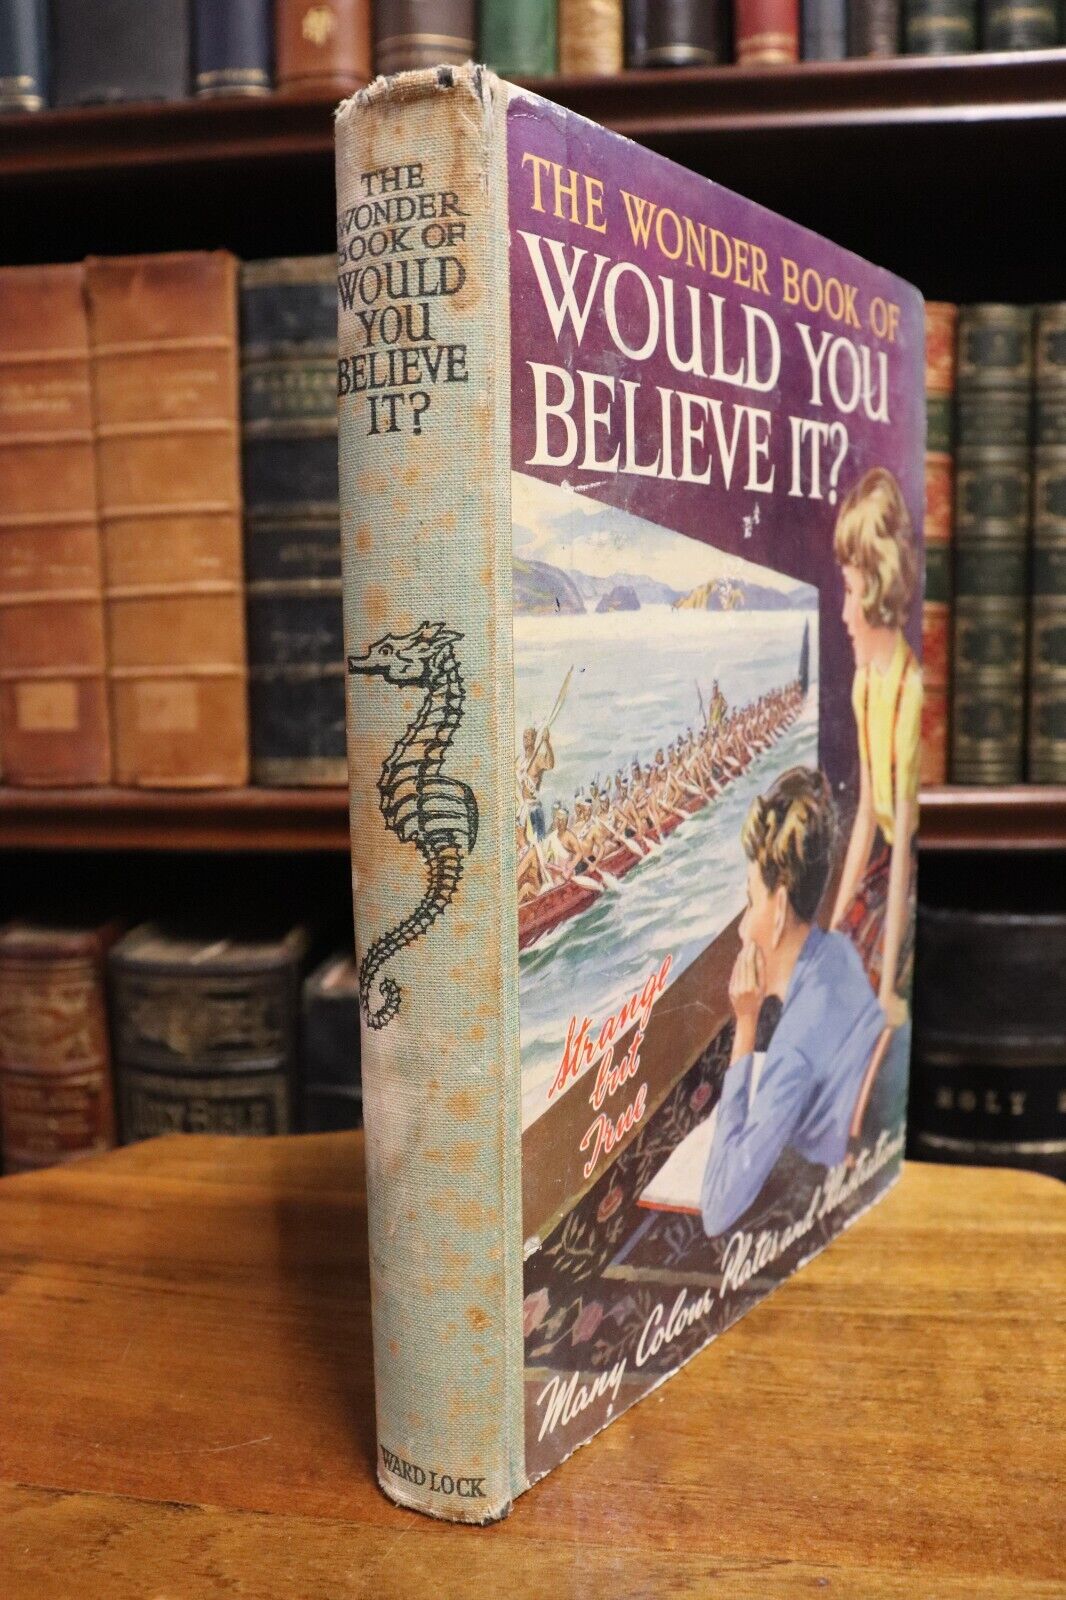 The Wonder Book Of Would You Believe It? - c1949 - Antique Childrens Book - 0